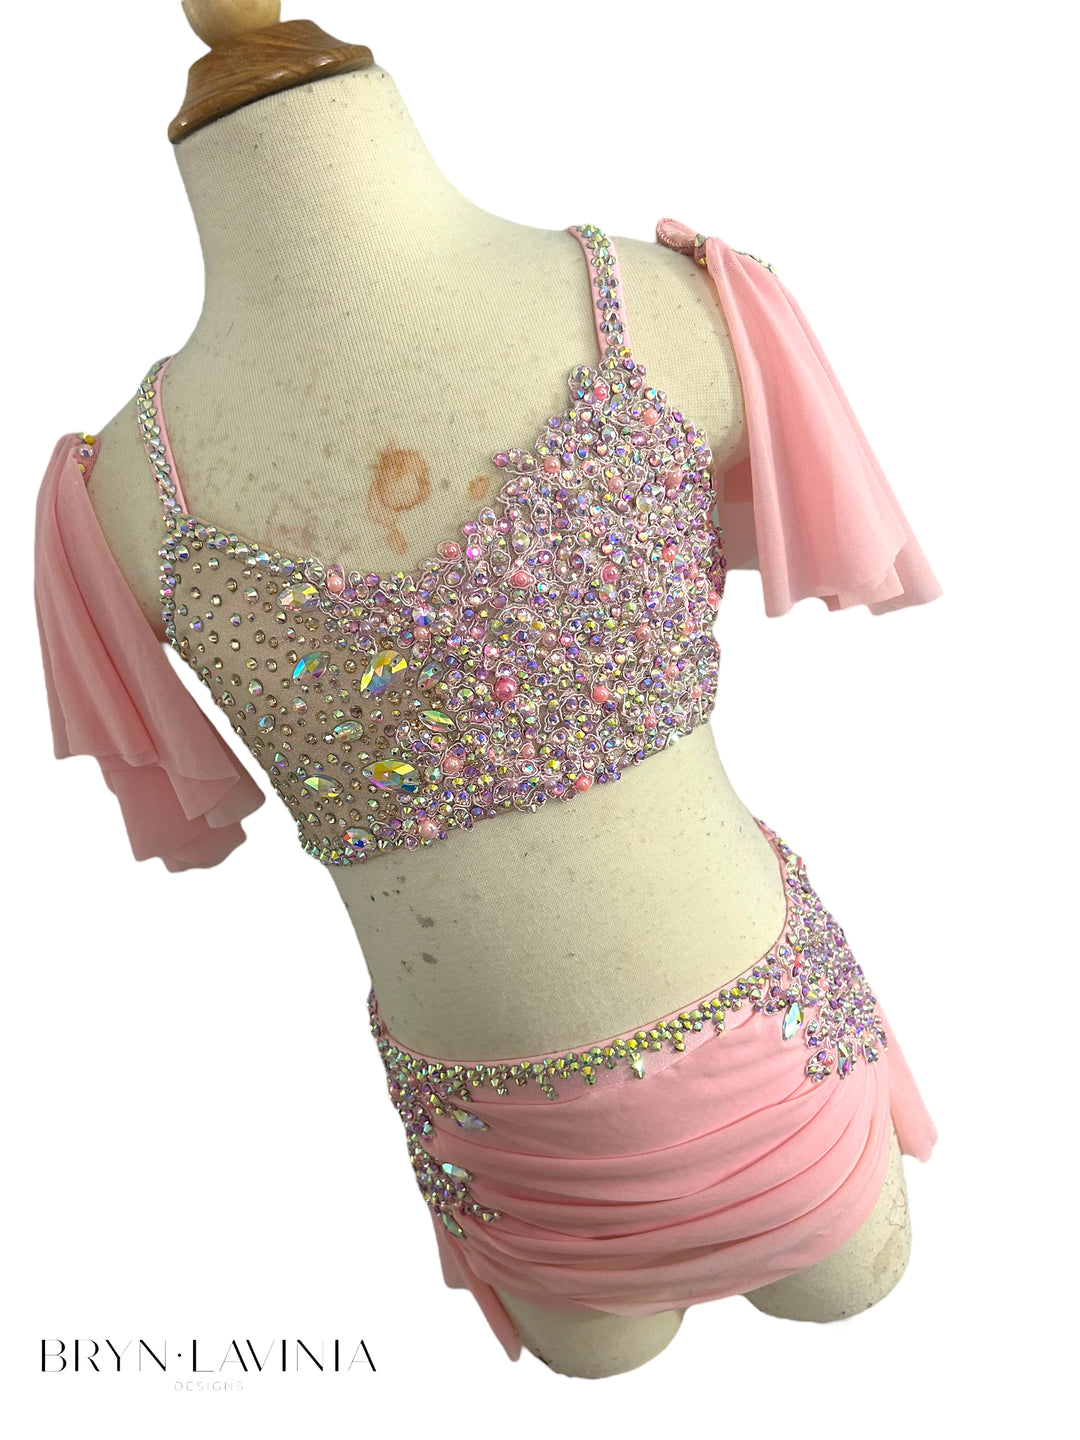 NEW CL Light Pink/nude ready to ship costume